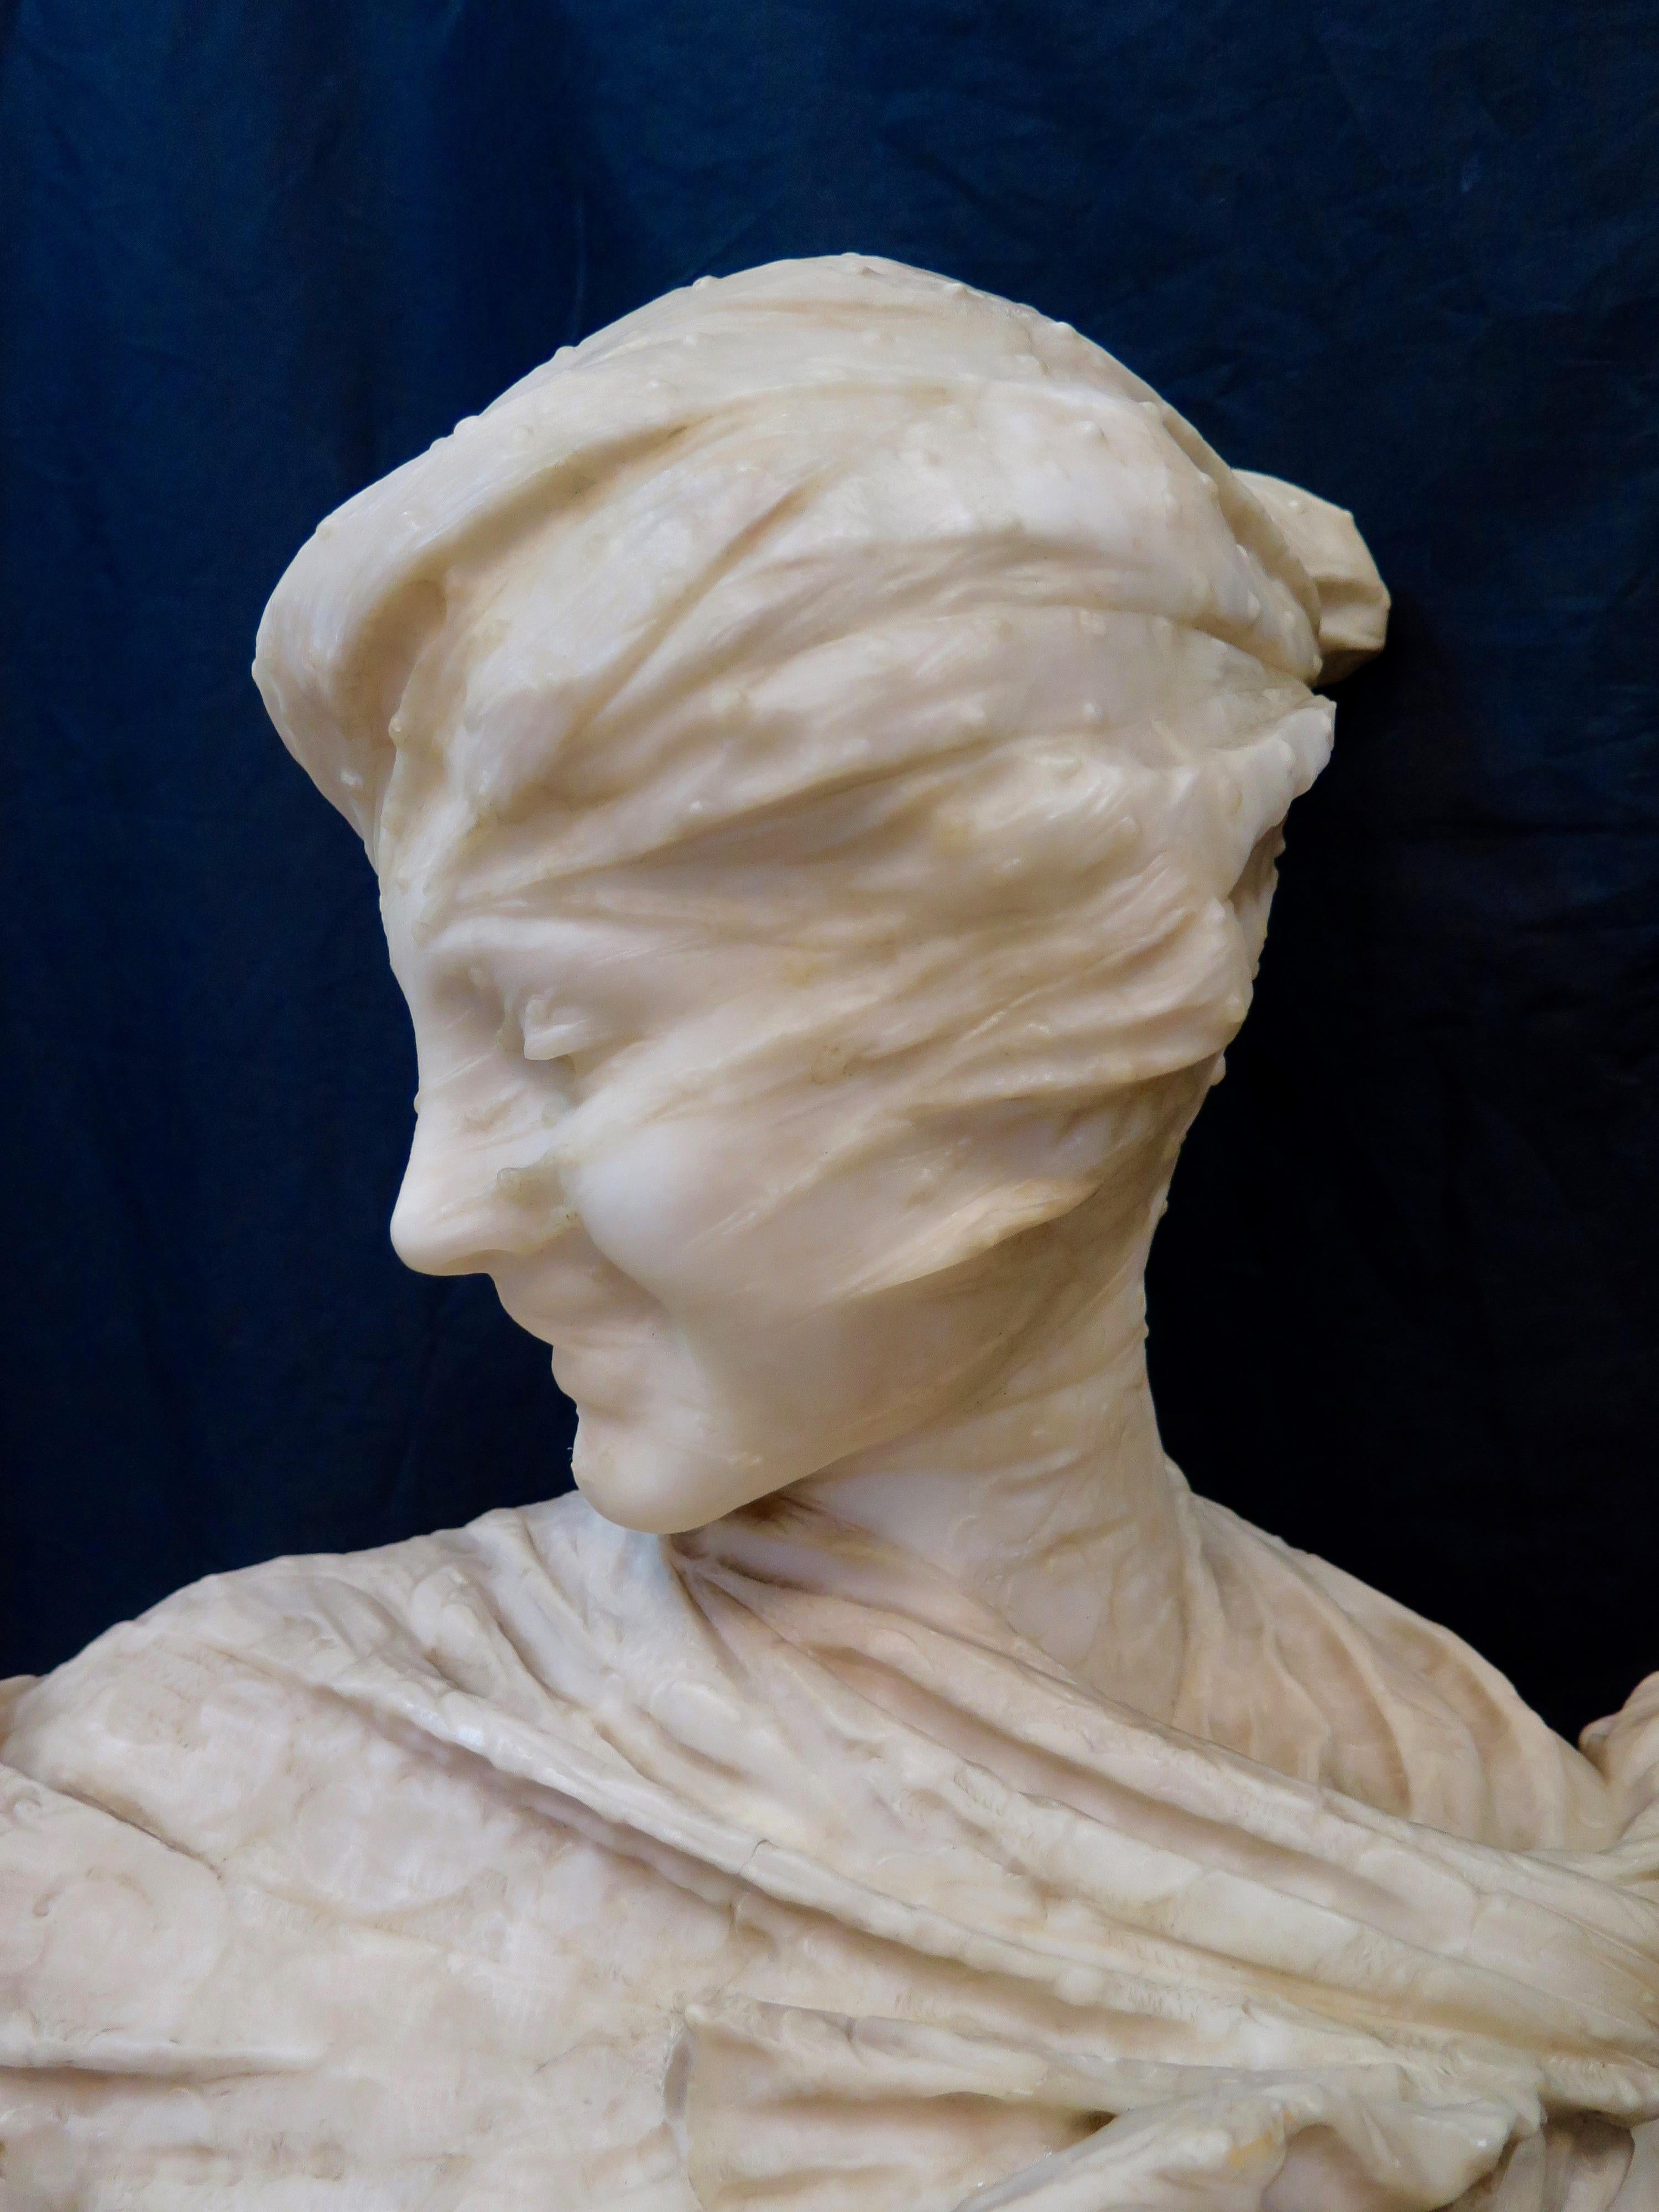 This vintage hand carved late 19th century Italian alabaster sculpture is signed E. Fiaschi. This exquisitely rendered depiction of a fashionable lady is presented wearing a tight see through veil wrapped around her face. Fiaschi's expertise & keen